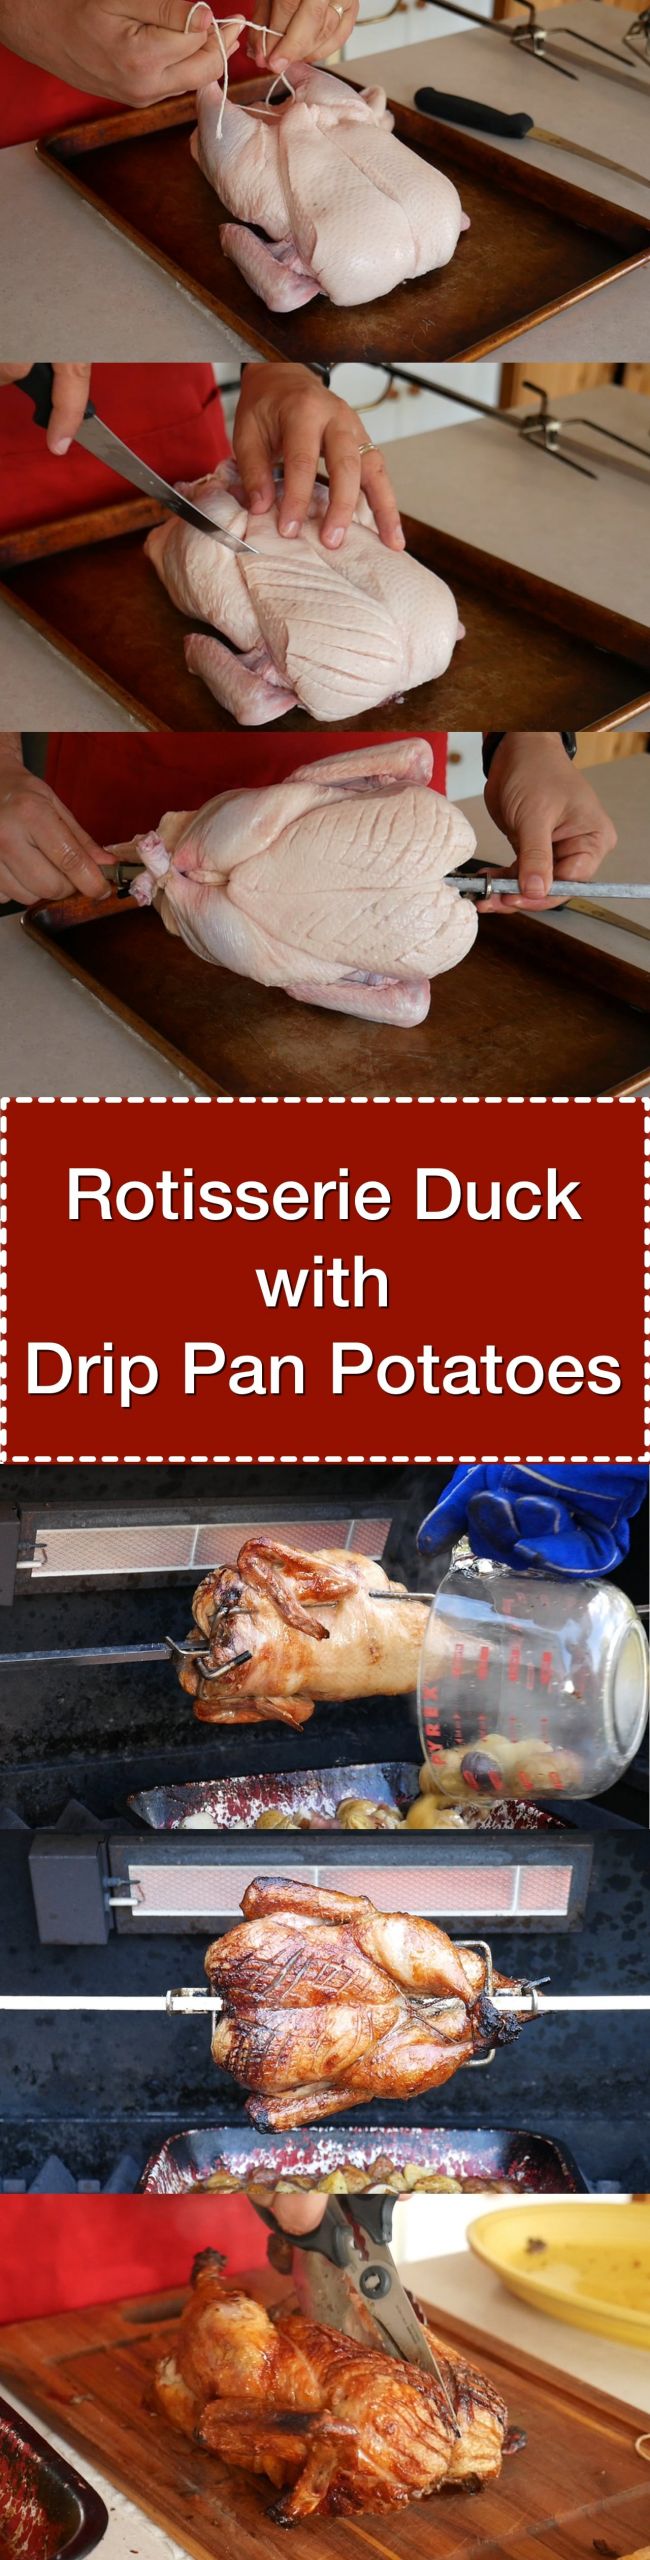 Rotisserie Duck Recipes
 Rotisserie Duck With Drip Pan Potatoes Dad Cooks Dinner